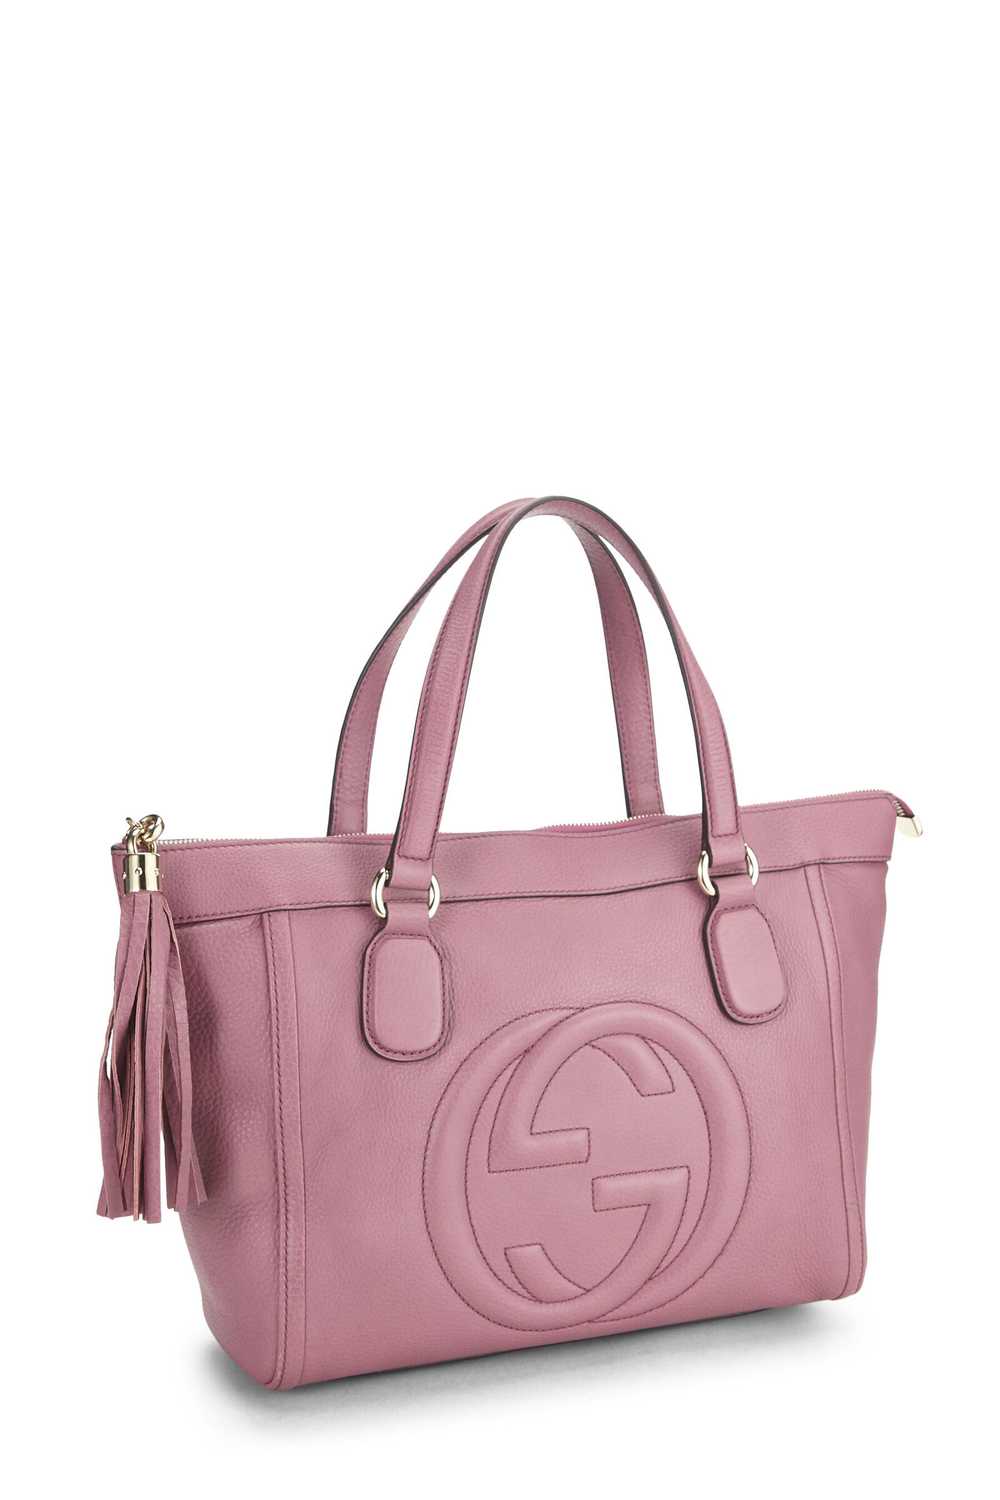 Pink Grained Leather Soho Zip Tote - image 2